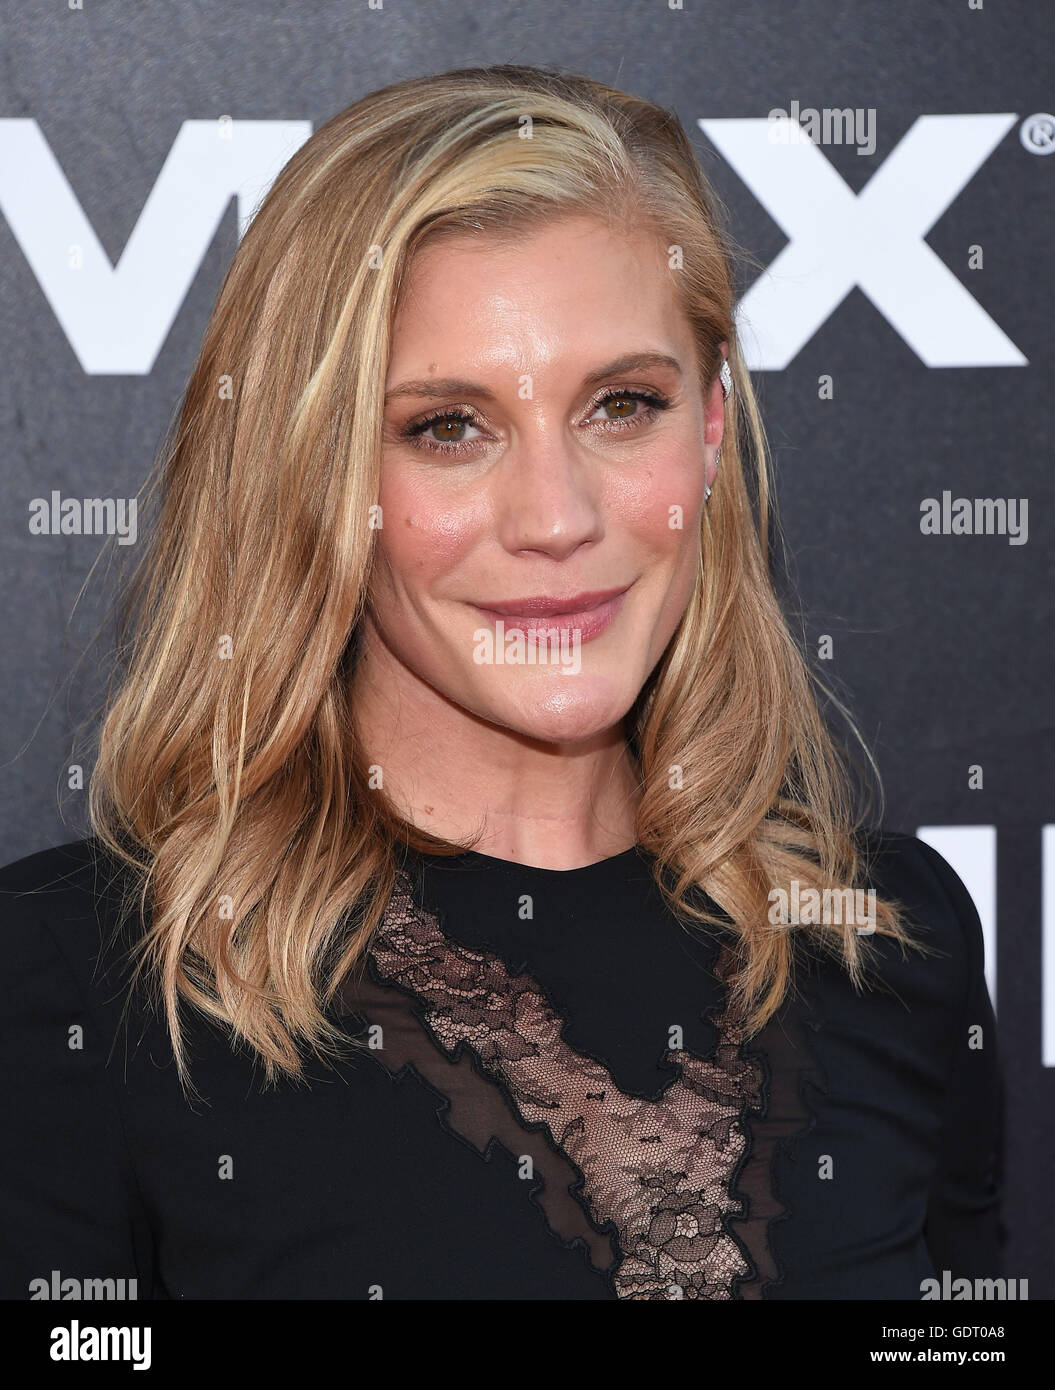 San Diego, California, USA. 20th July, 2016. Katee Sackhoff arrives for the premiere of the film 'Star Trek Beyond' at the Embarcadero Marina Park. Credit:  Lisa O'Connor/ZUMA Wire/Alamy Live News Stock Photo